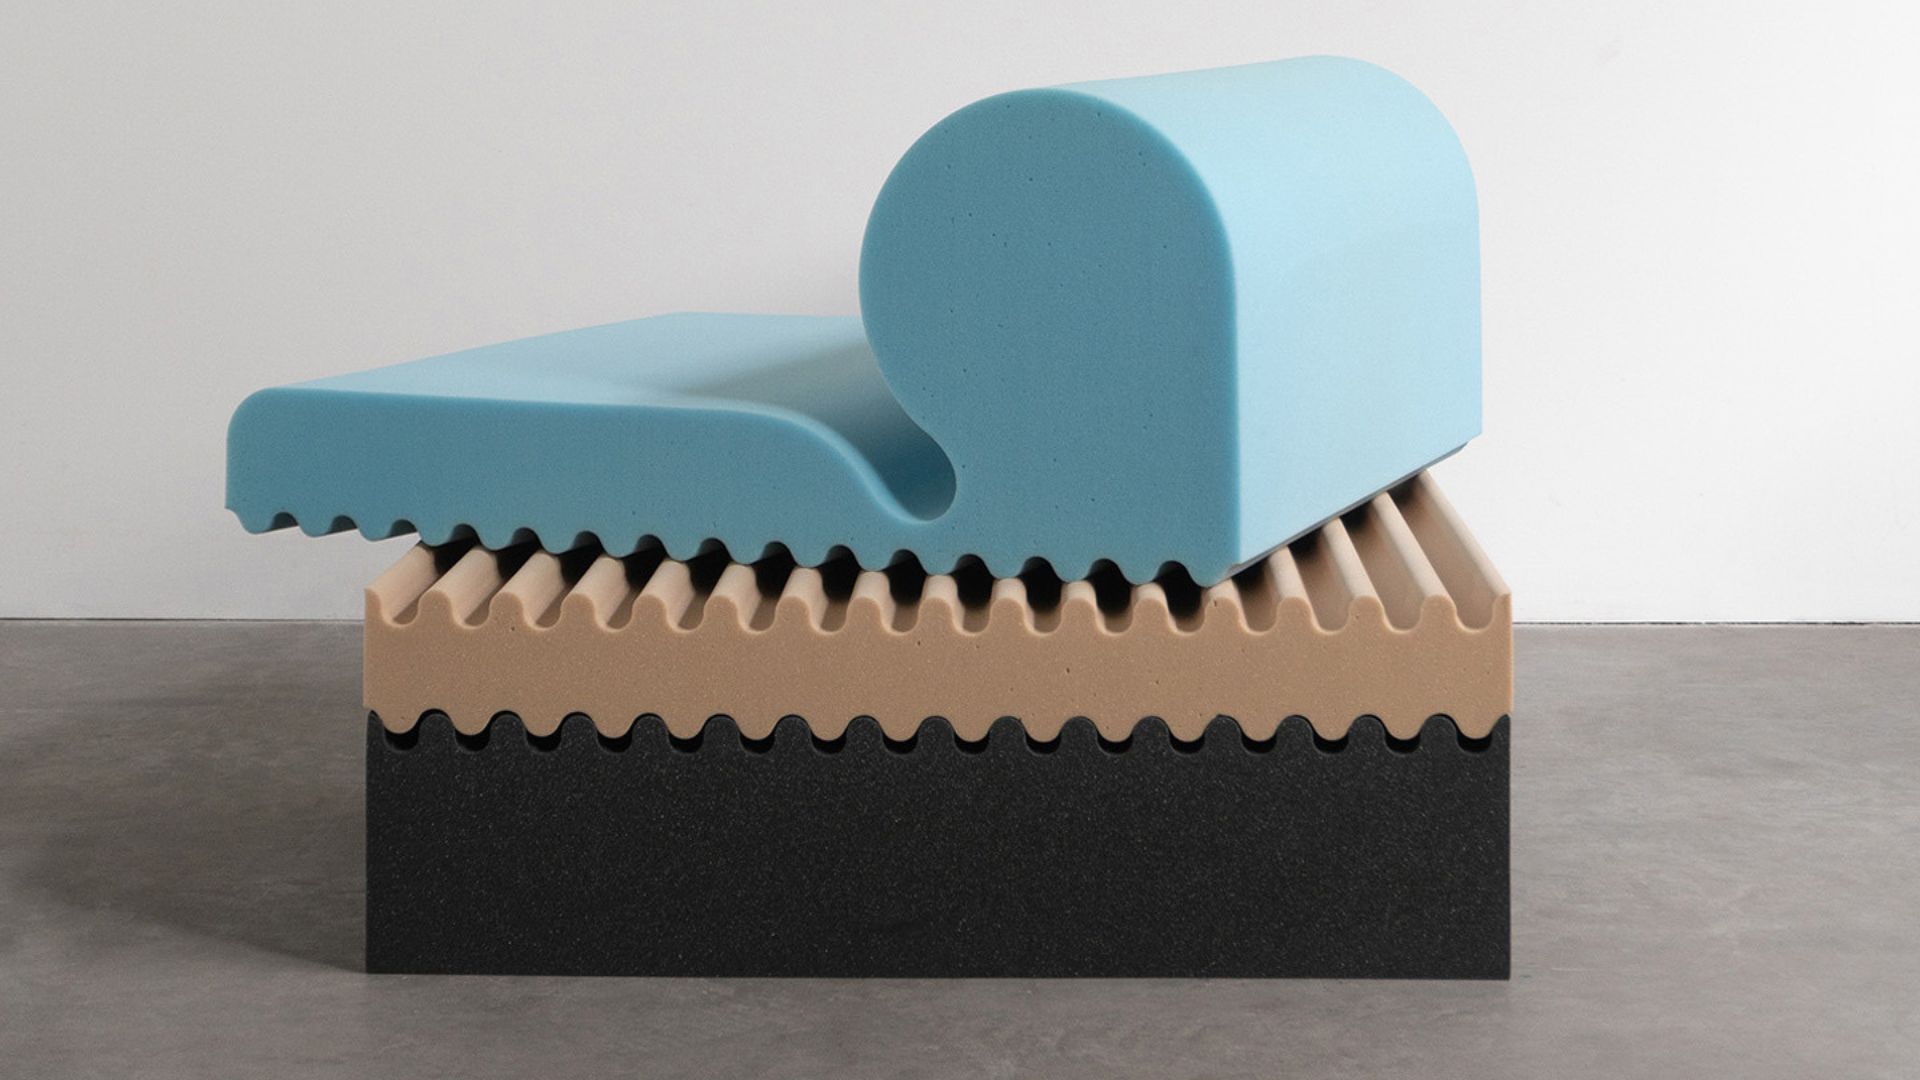 Cutted Clouds: Finemateria reinvents the polyurethane foam sofa